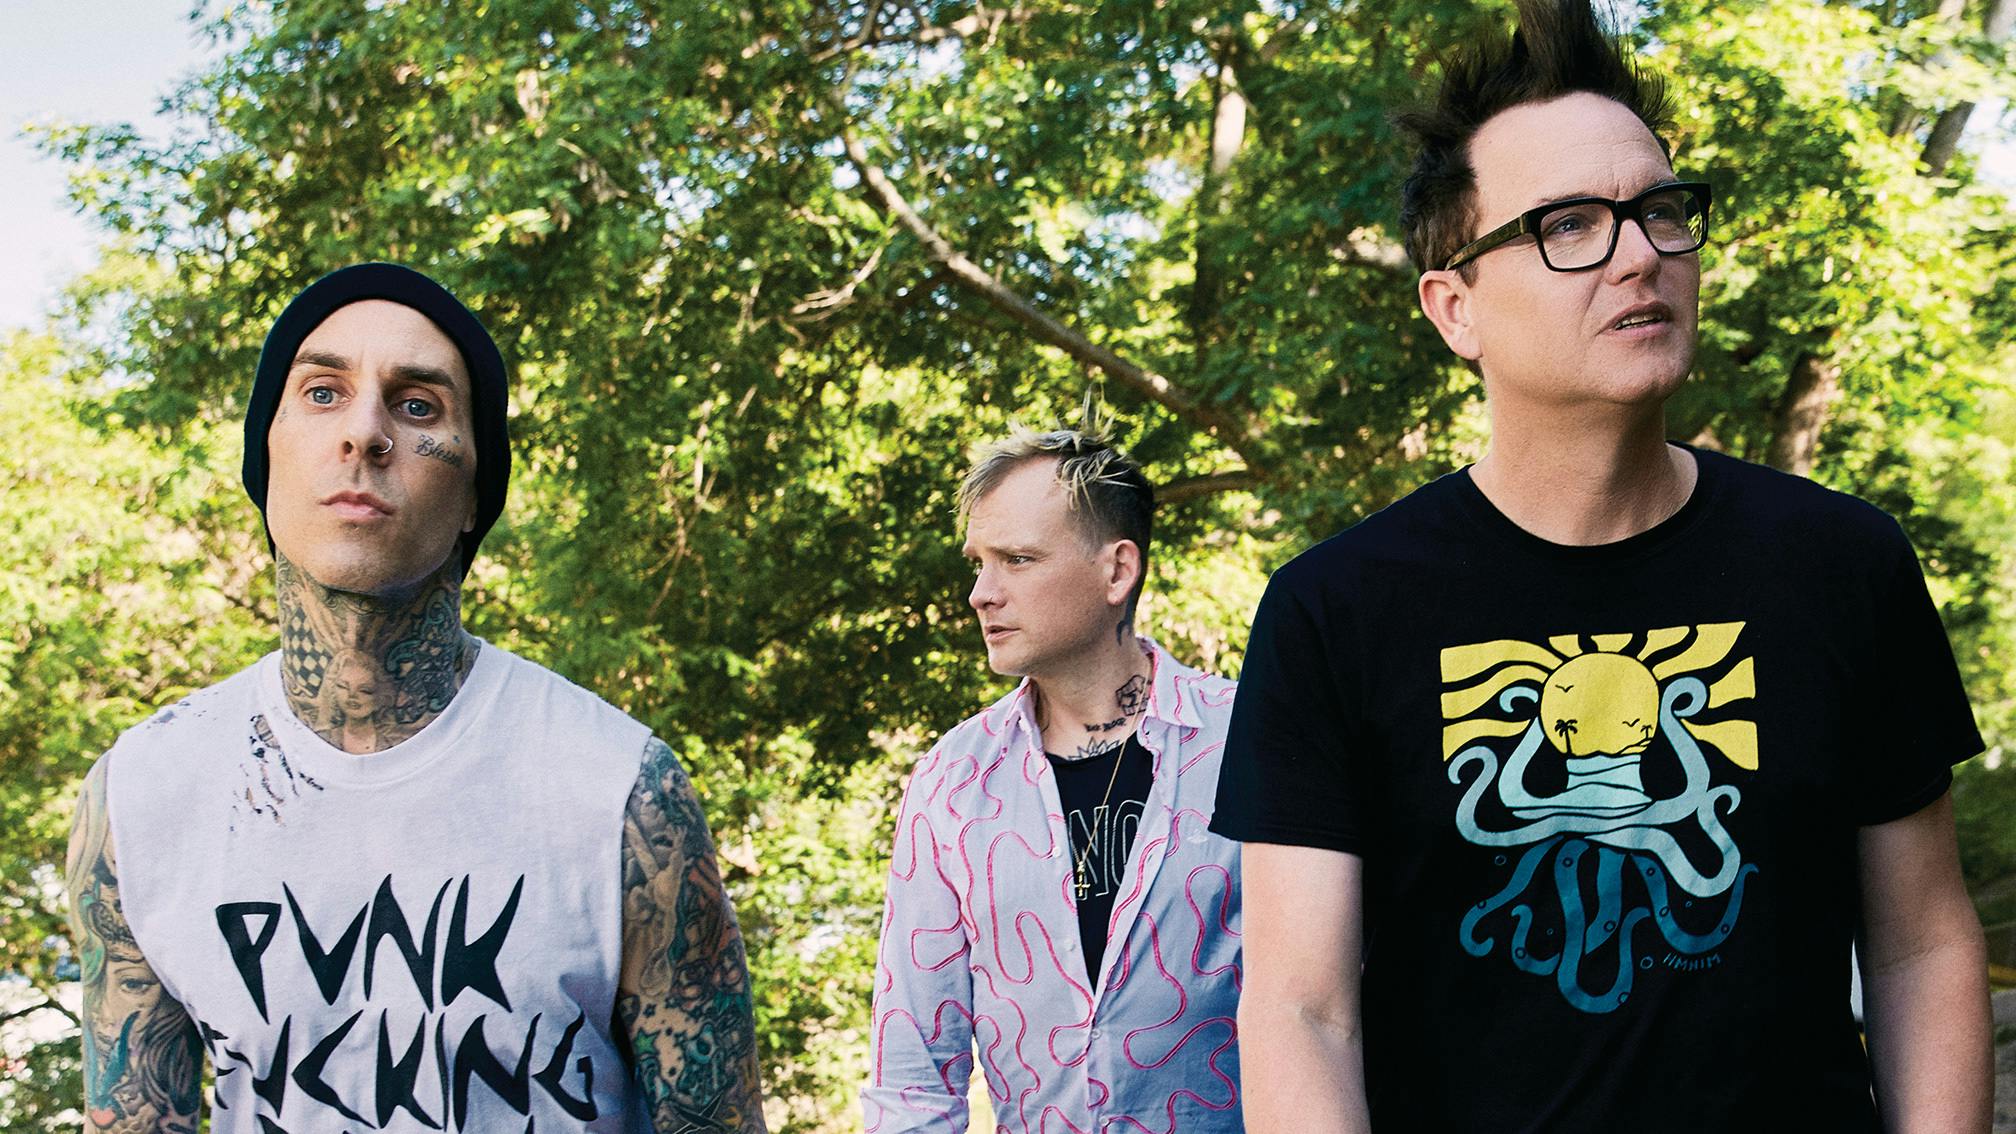 Mark Hoppus on blink-182's future: "I'm open to anything"